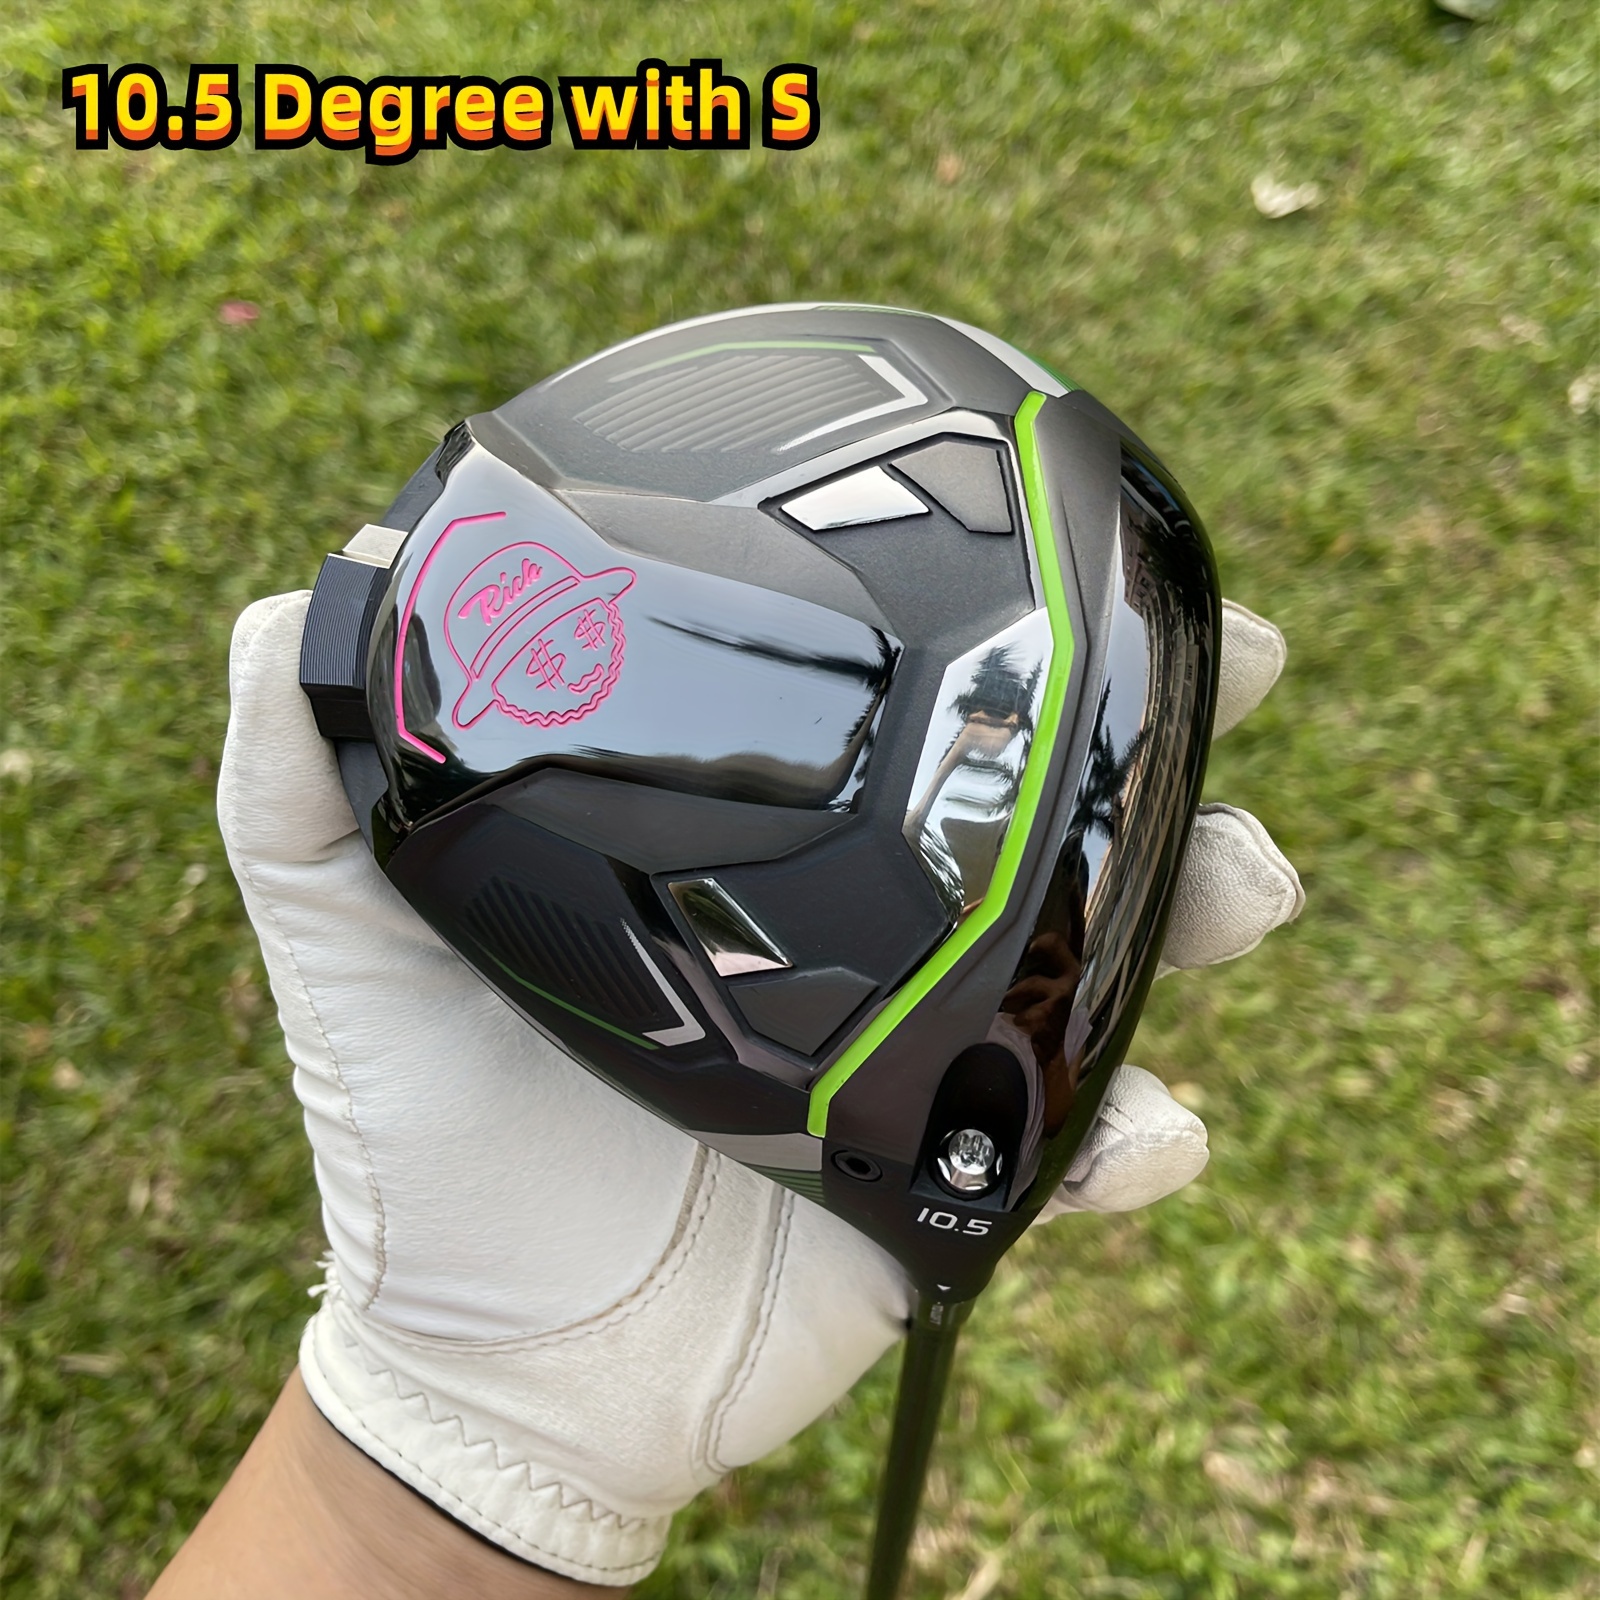 golf driver 10 5 degree and 60g graphite shaft 12 loft and weights can adjustable upgrade your game